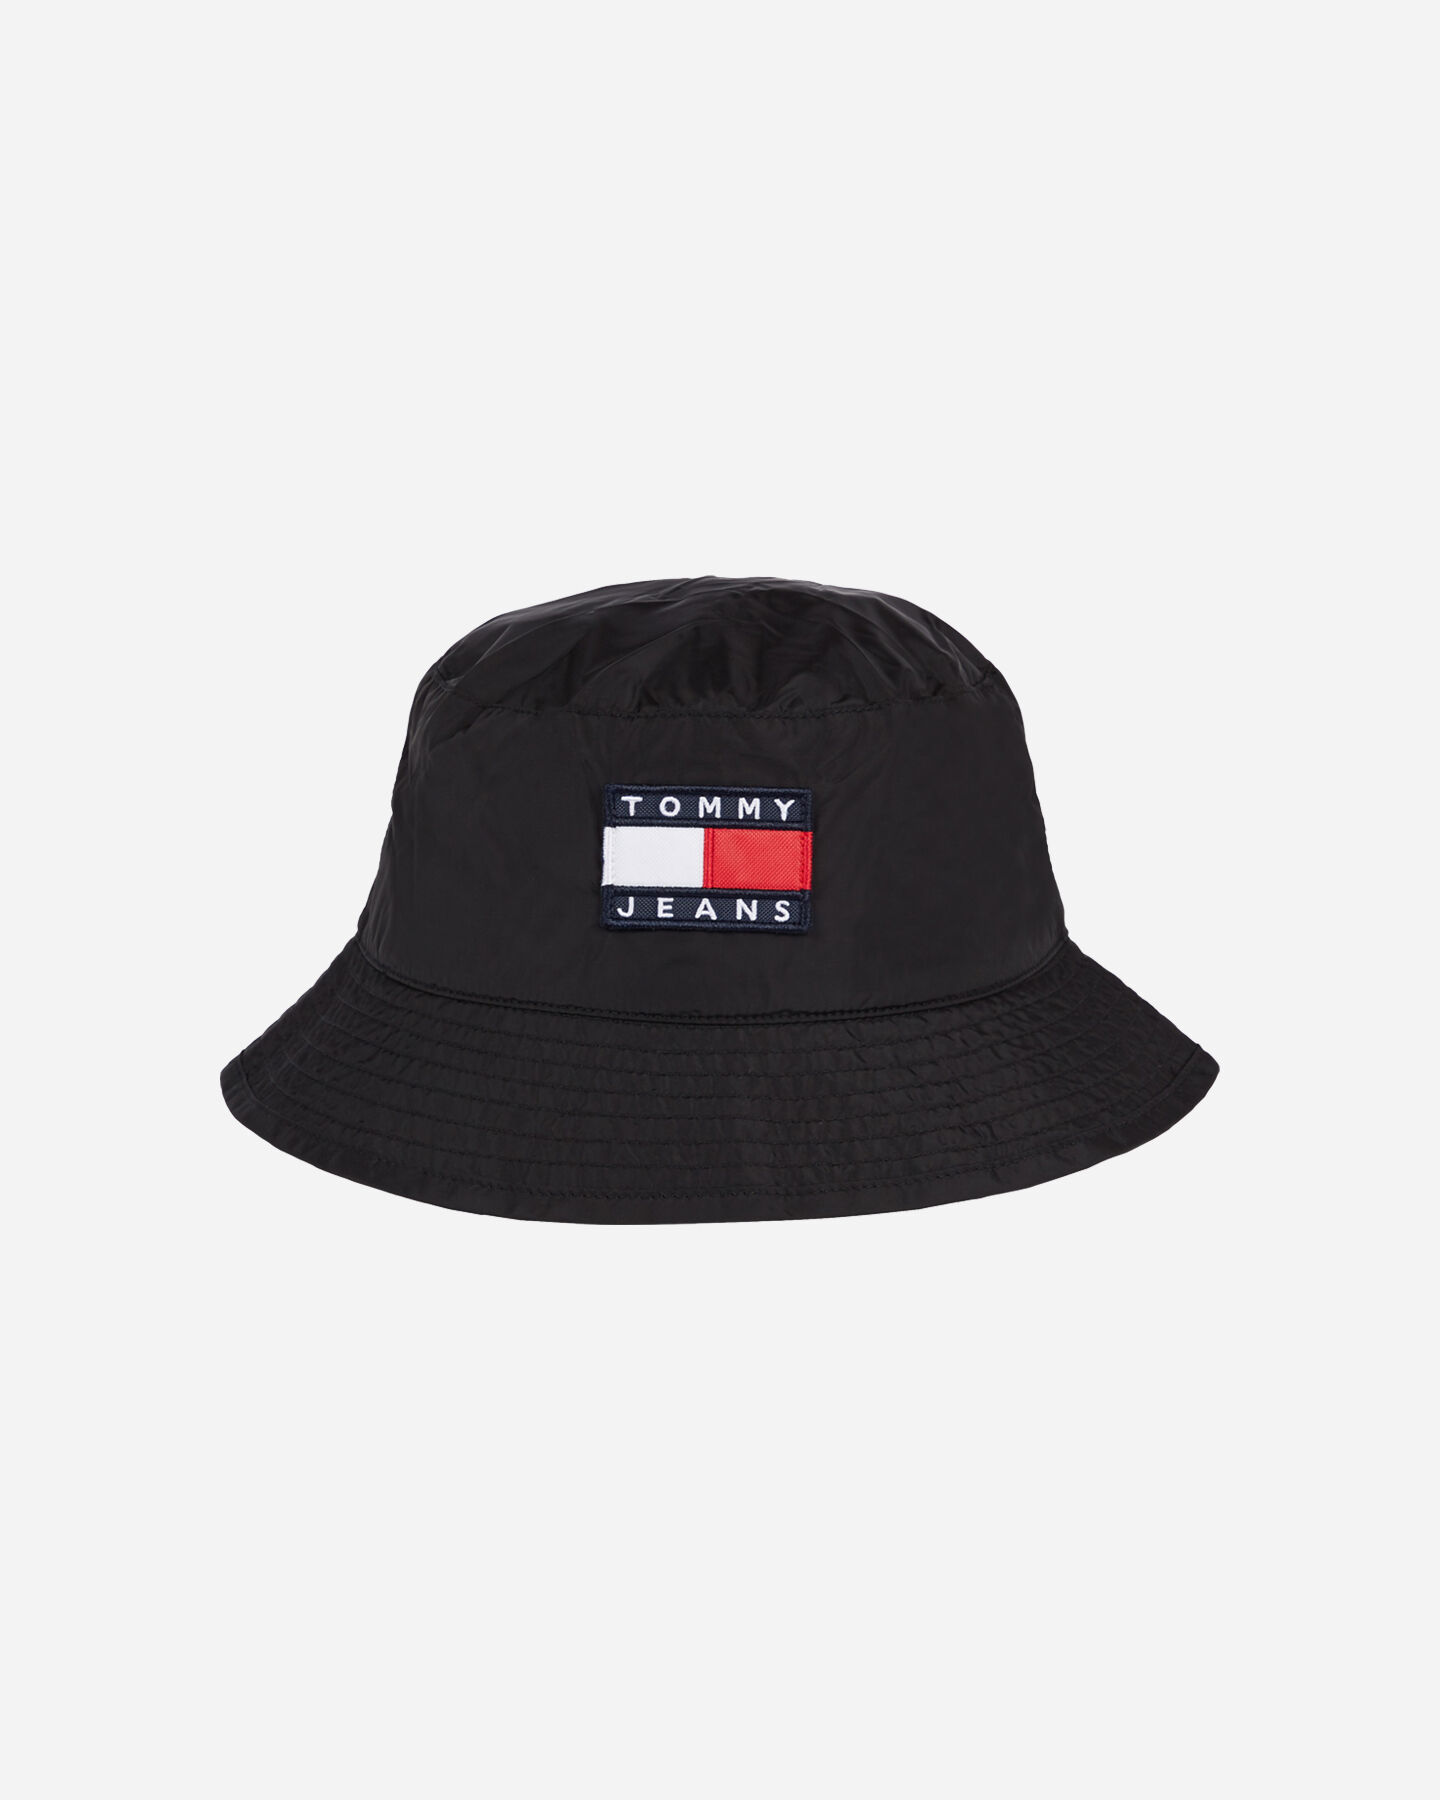  Cappellino TOMMY HILFIGER HERITAGE LOGO M S4115011|BDS|OS scatto 0